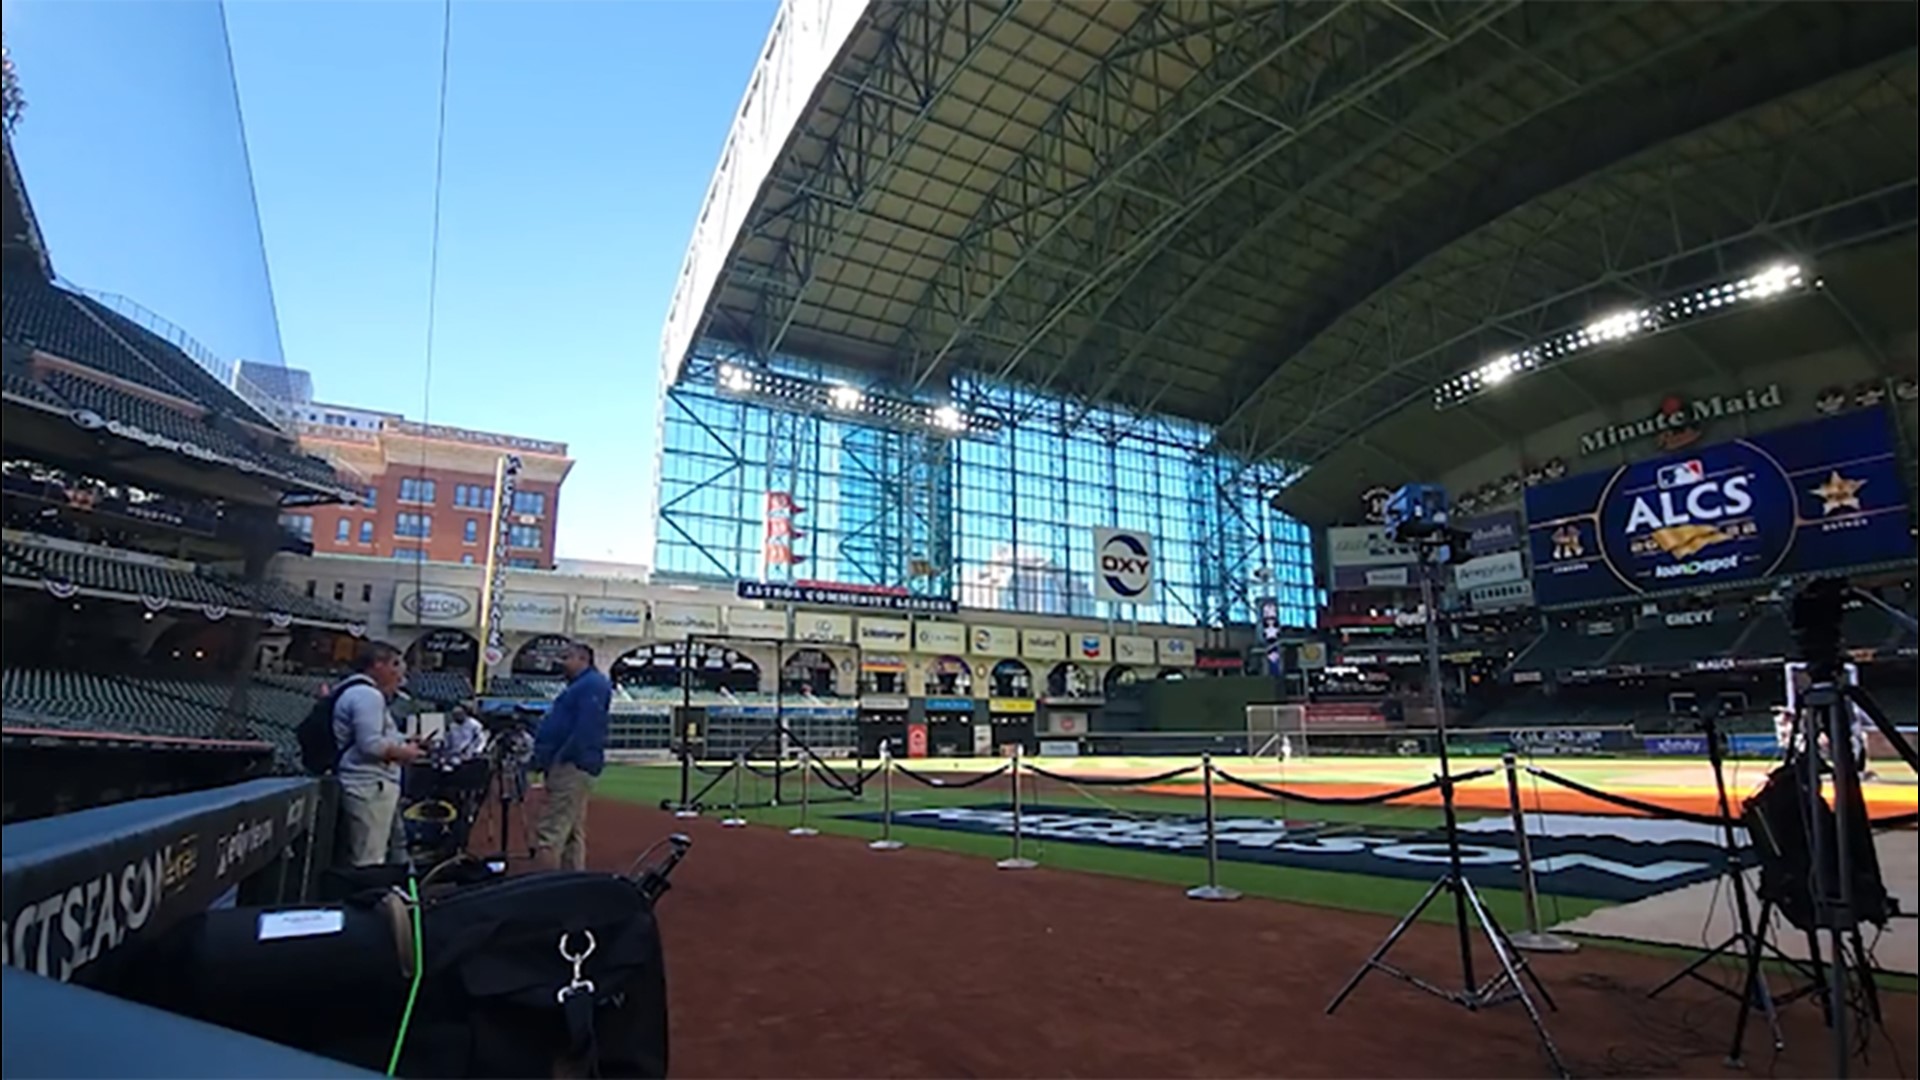 Houston Astros on X: RT @MinuteMaidPark: Check out our new